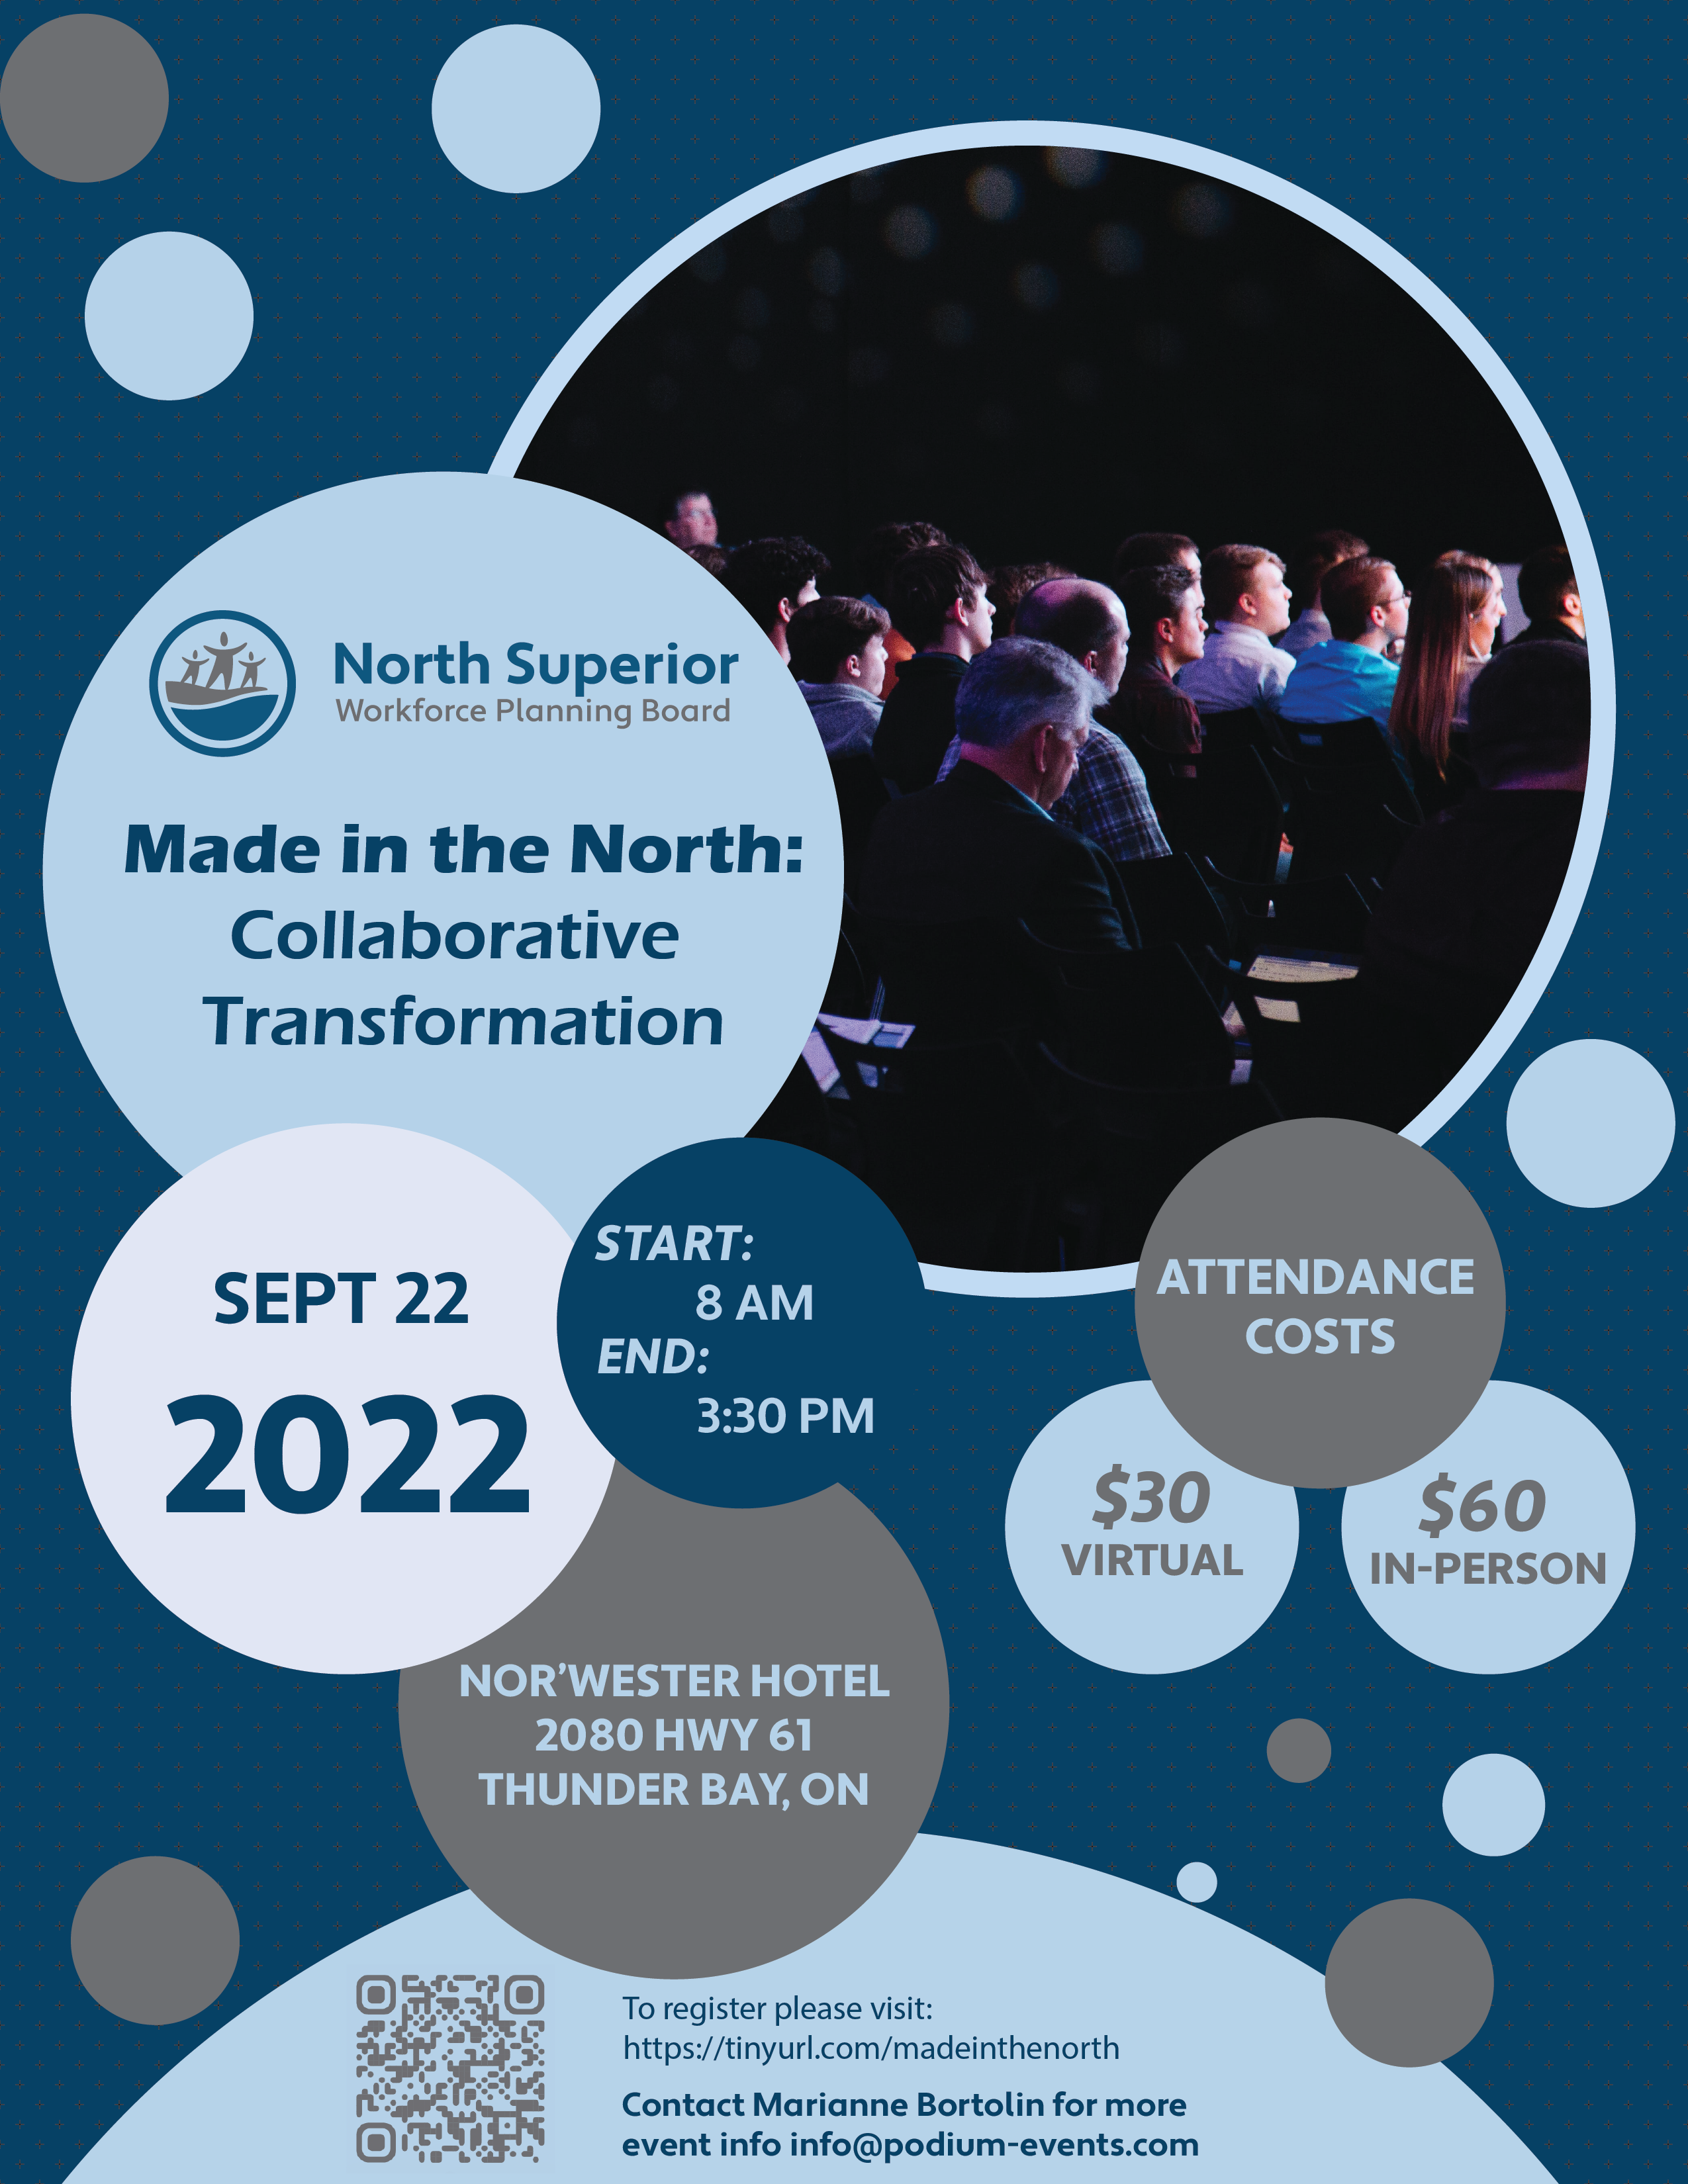 Made in the North: Collaborative Transformation, September 22 2022, 8 AM - 3:30 PM, Nor'wester Hotel, registration is $30 for virtual access, $60 for in-person attendance.